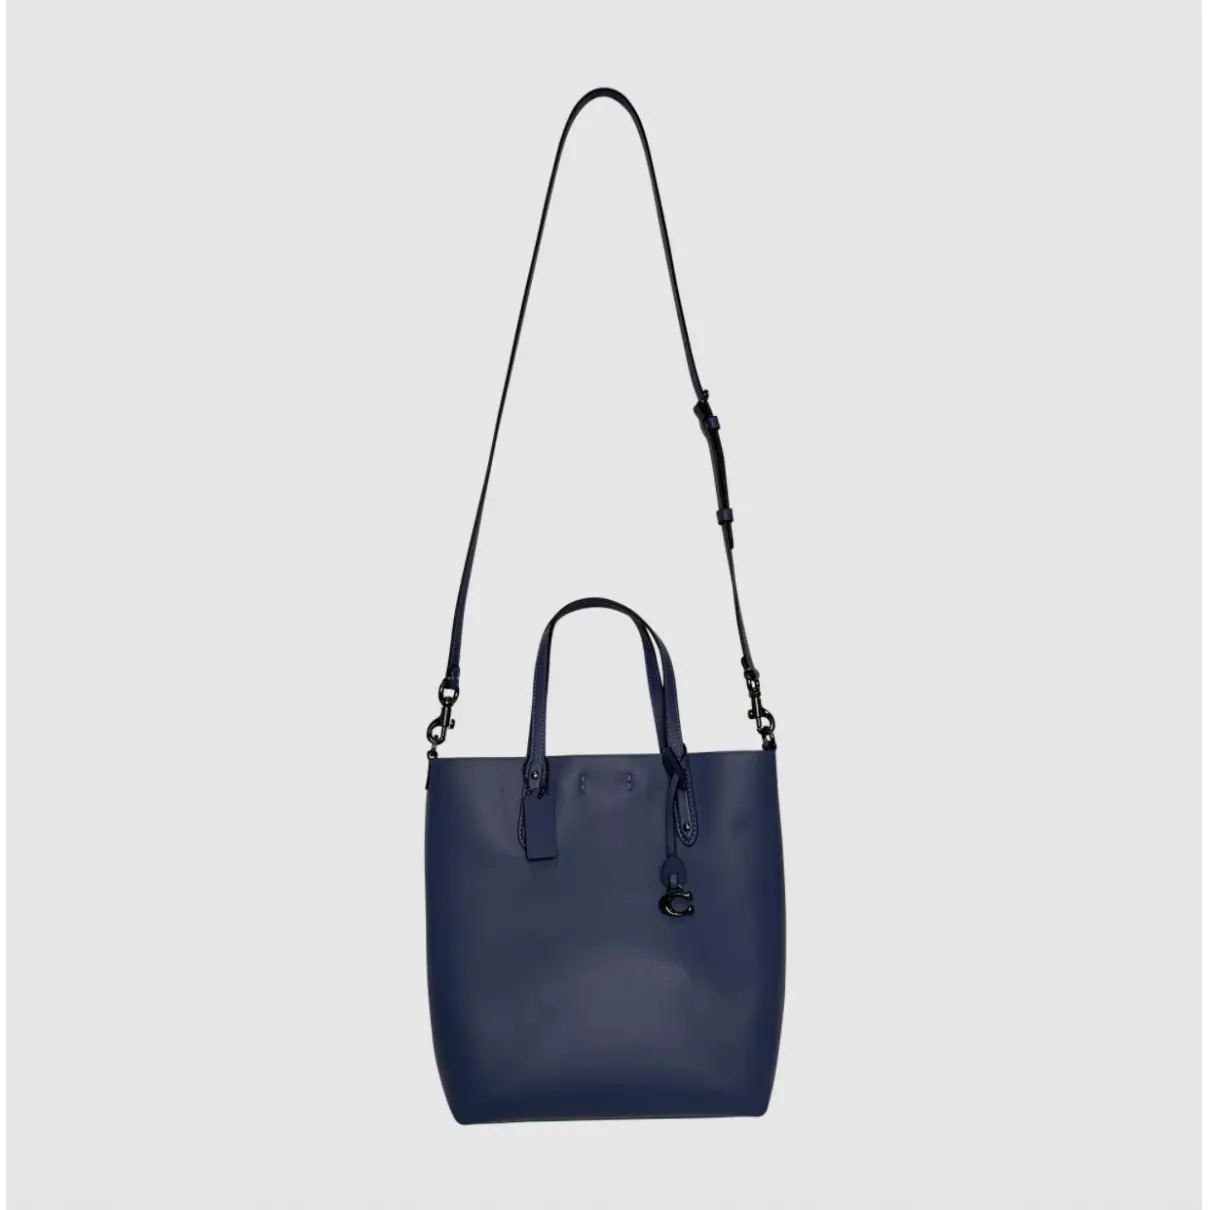 Buy Coach Leather tote online